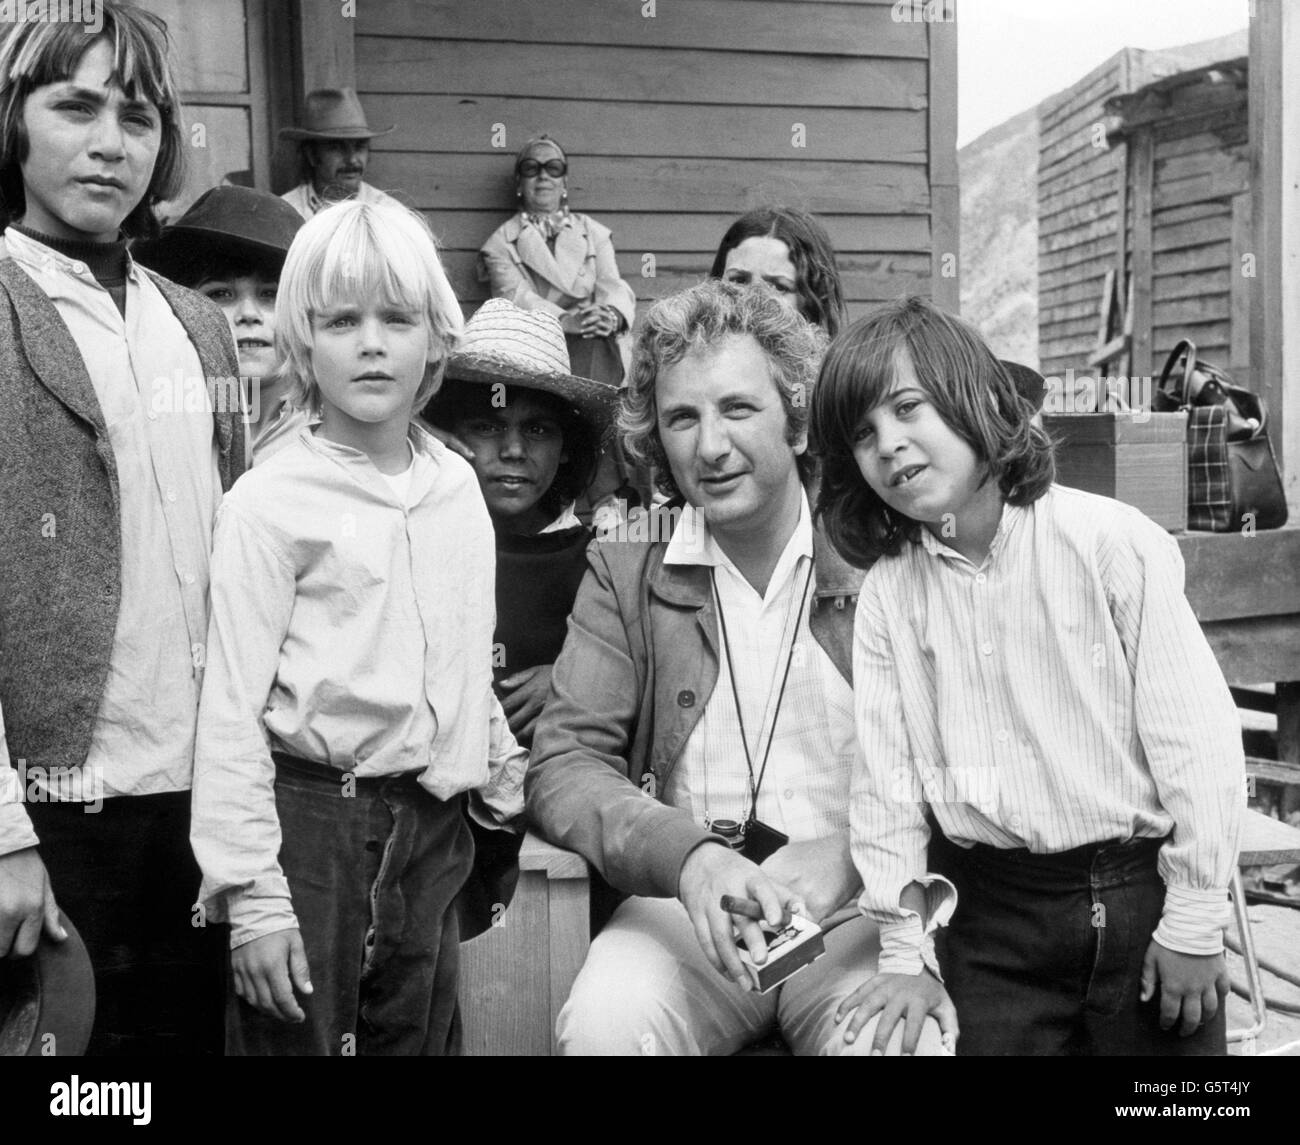 Film director Michael Winner on the set of his western Chato's Land, which stars Charles Bronson. Two of the young actors with him, Jason (right) and Valentine (blond, centre), are sons of British actors Jill Ireland and David McCallum. Stock Photo